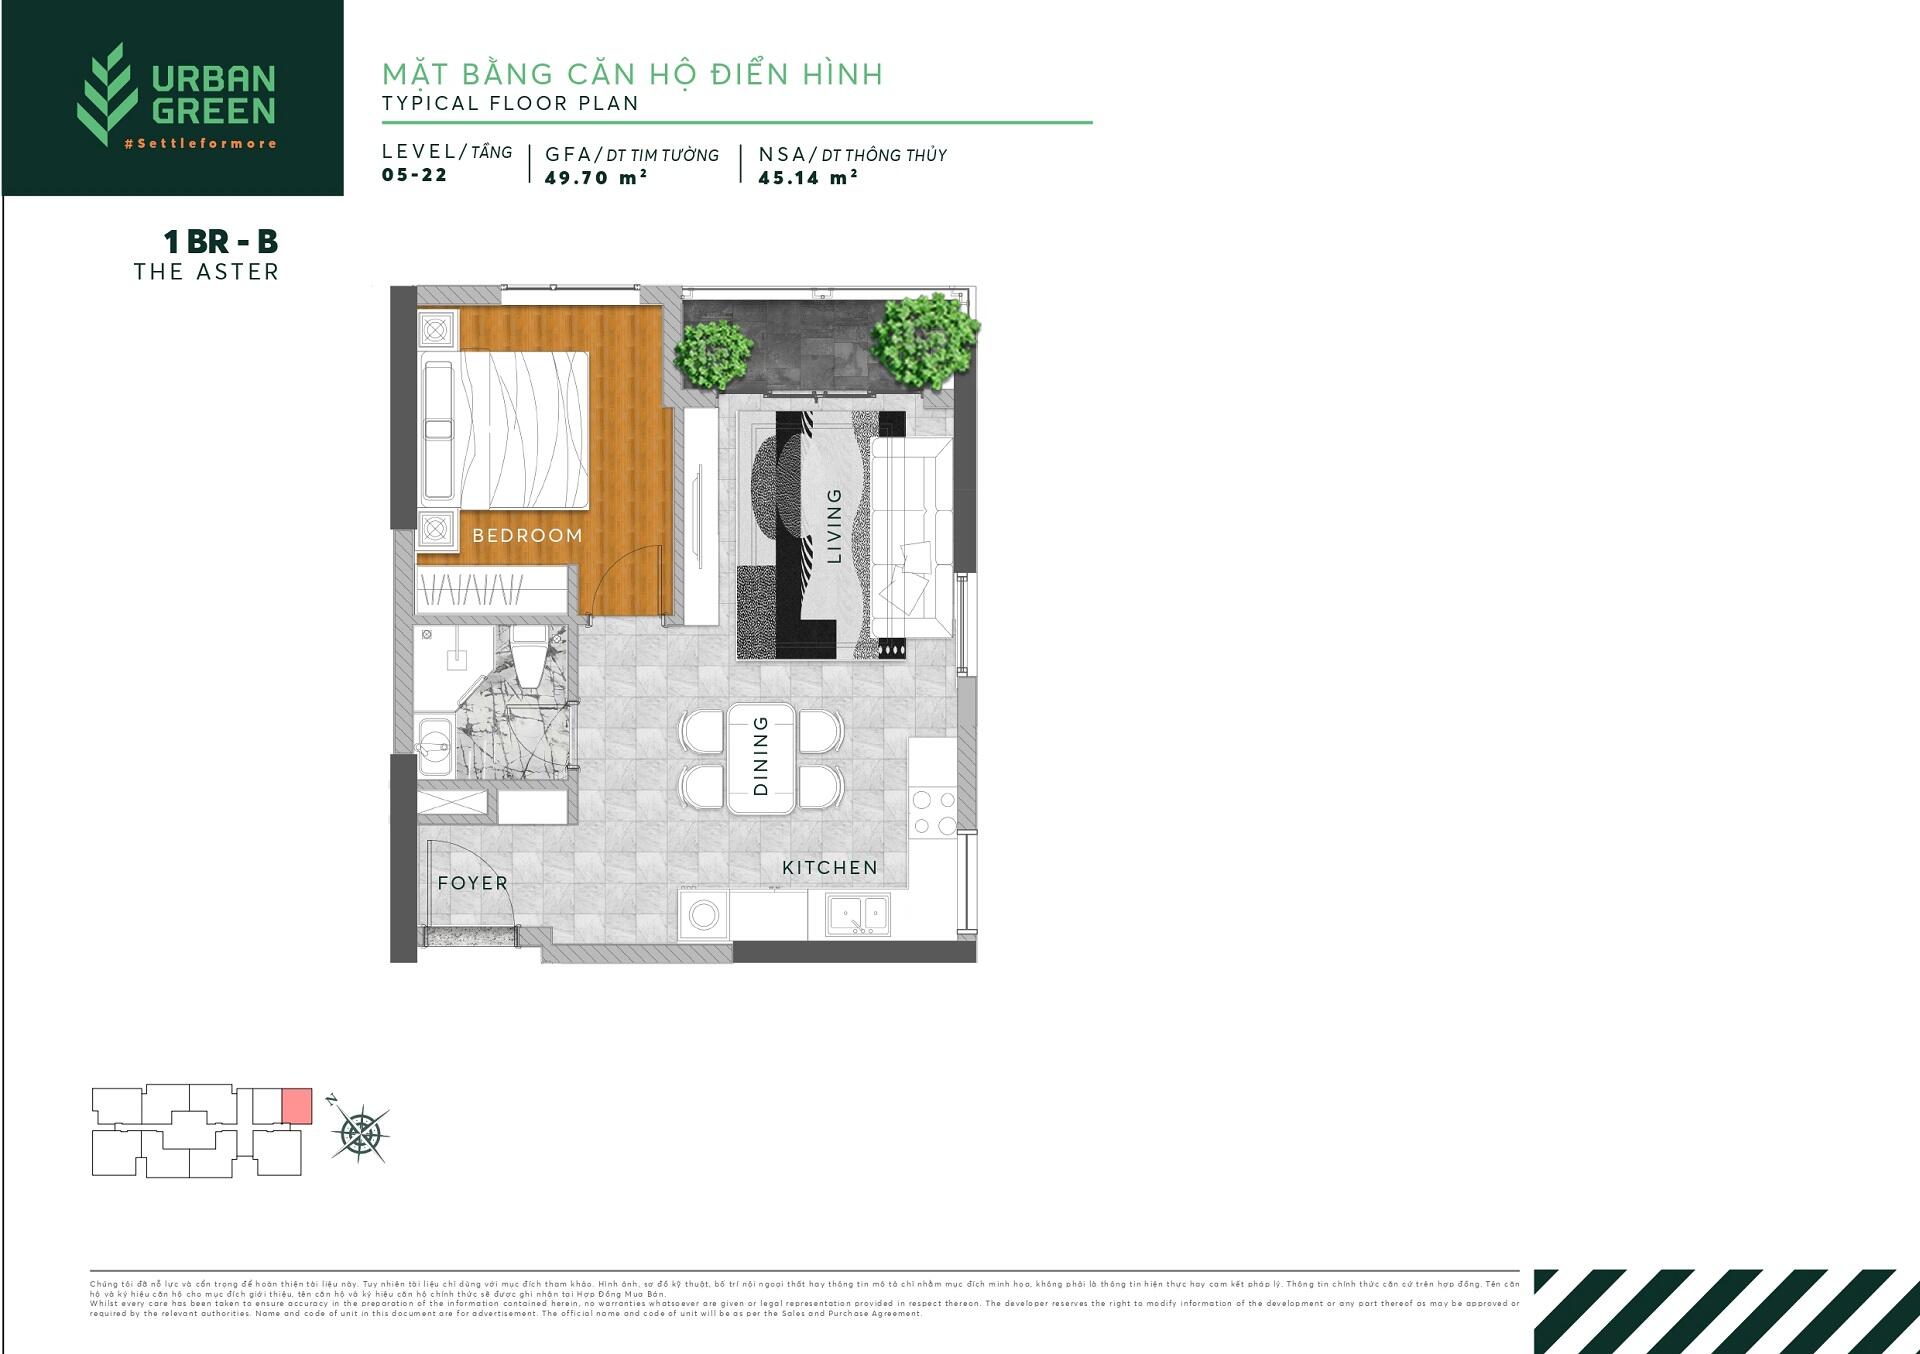 Floor plan of The Aster apartment 1 bedroom 1BR - B